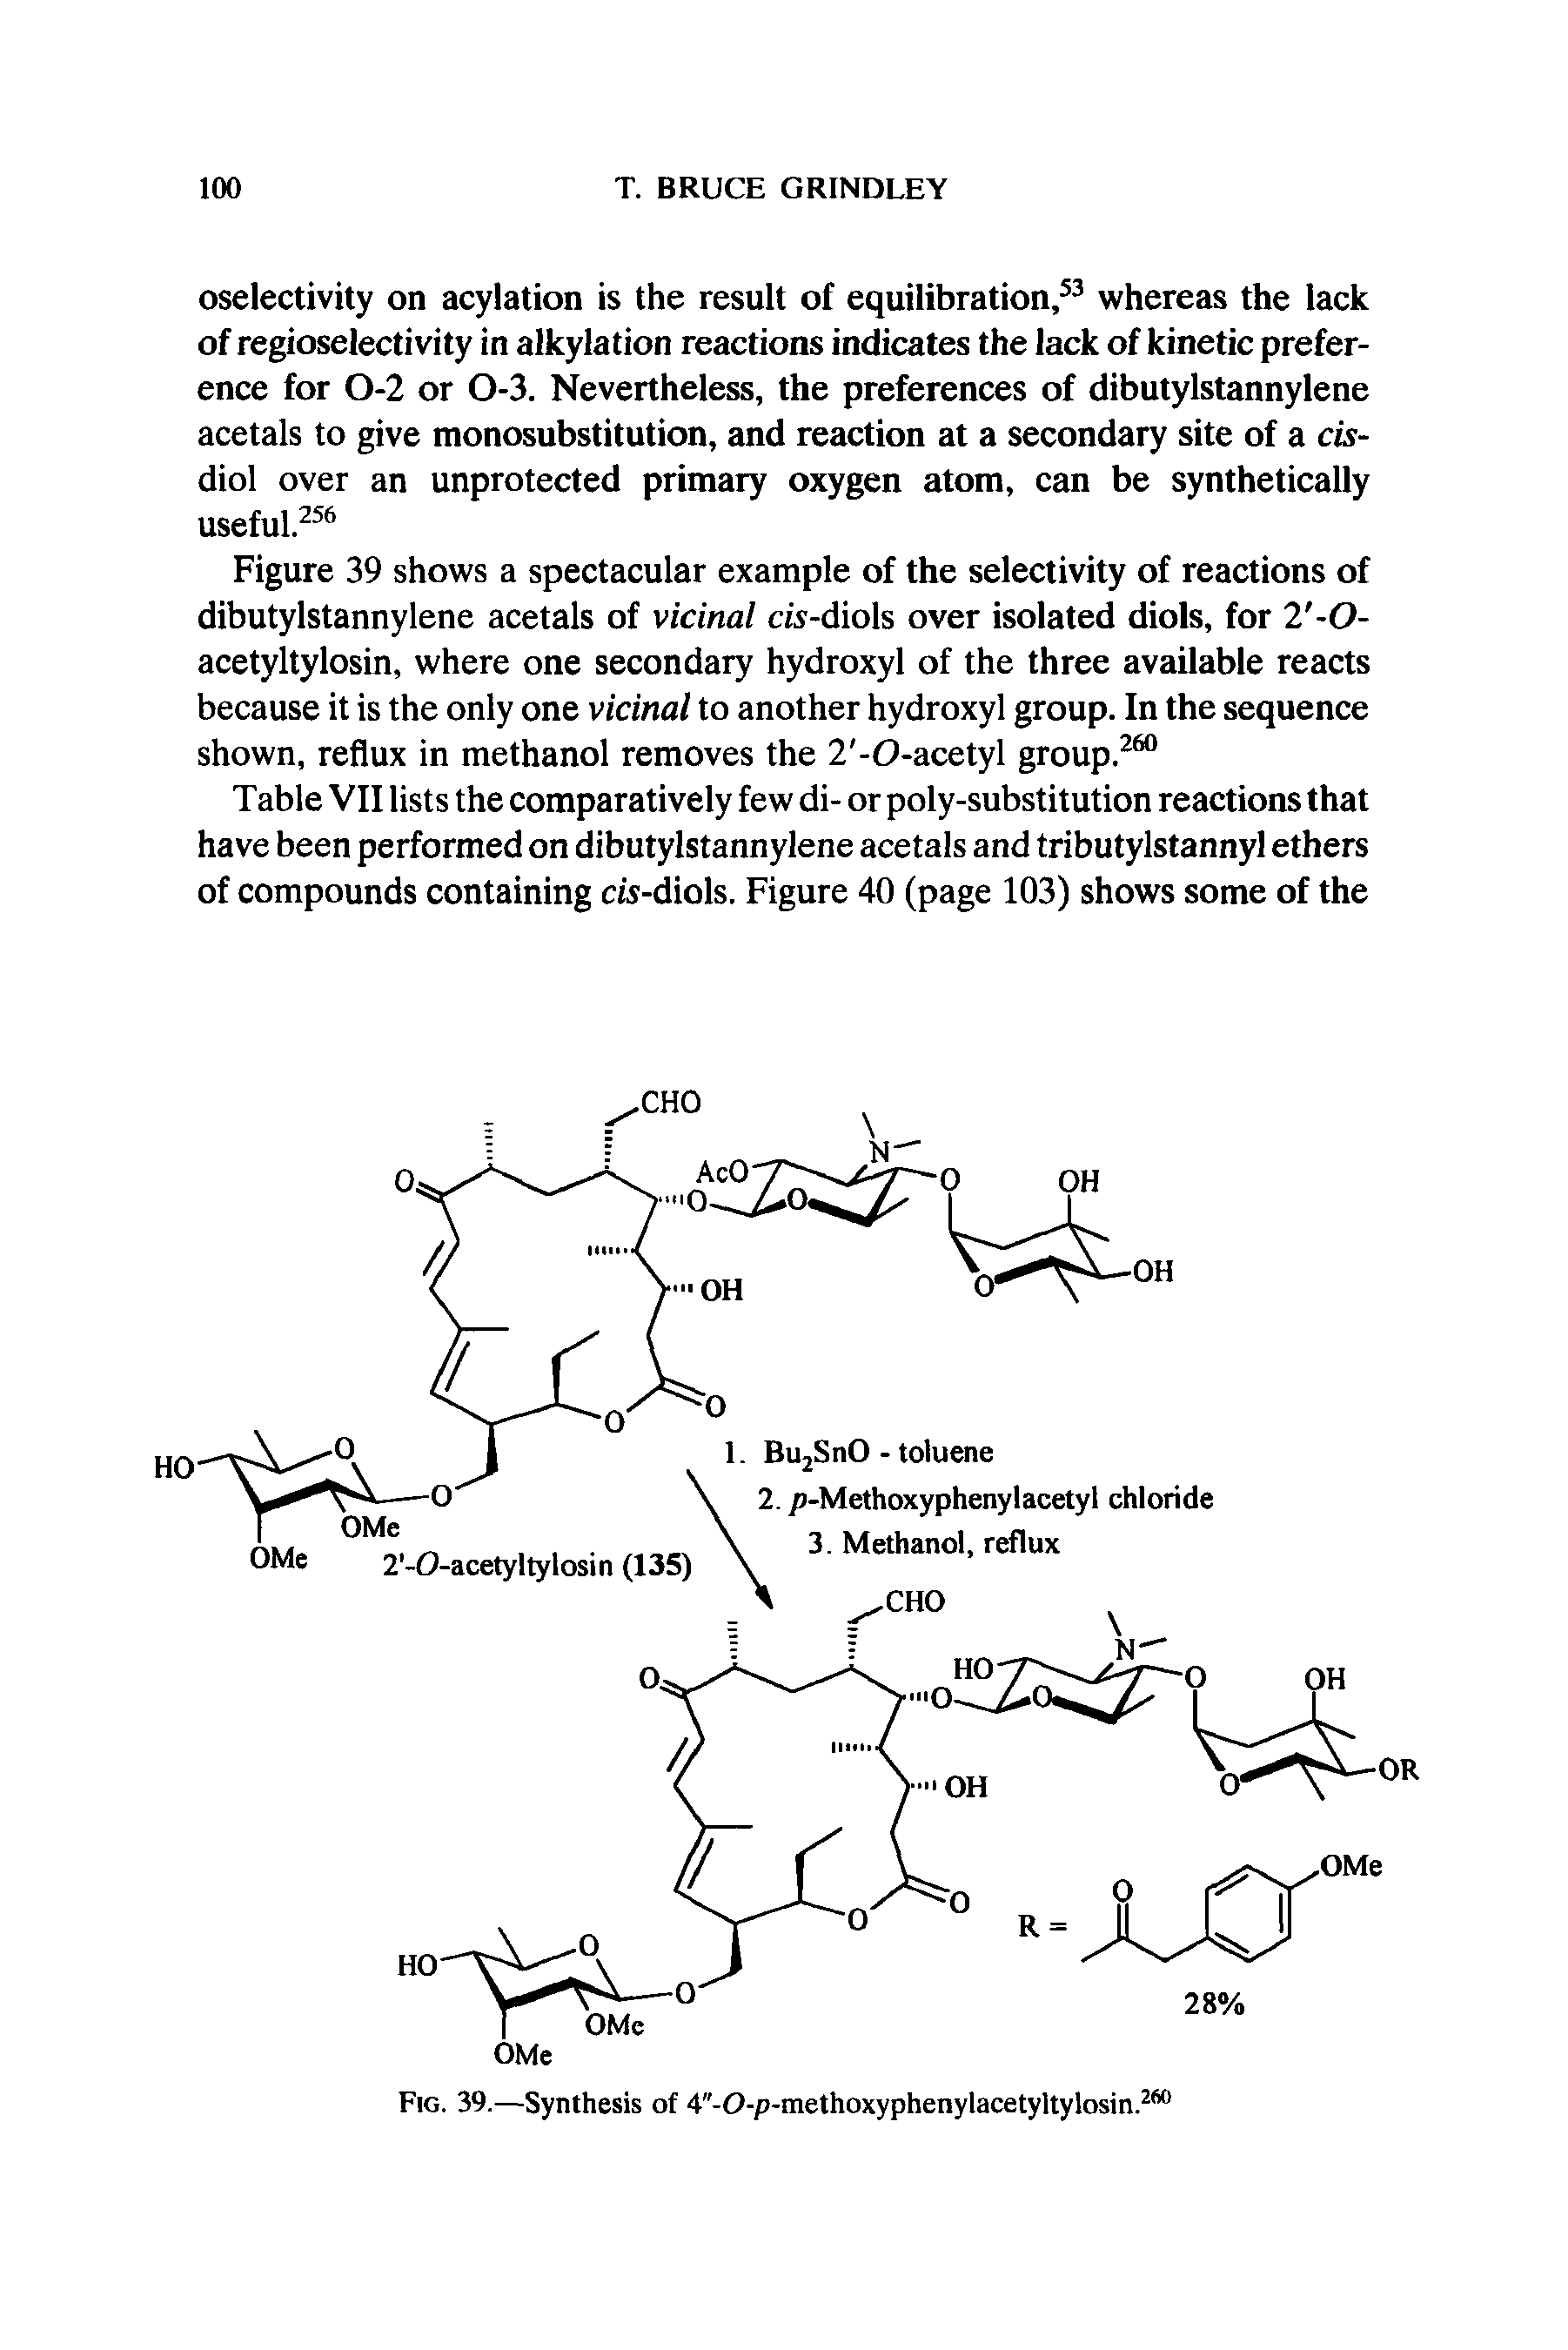 Table VII lists the comparatively few di- or poly-substitution reactions that have been performed on dibutylstannylene acetals and tributylstannyl ethers of compounds containing cis-diols. Figure 40 (page 103) shows some of the...